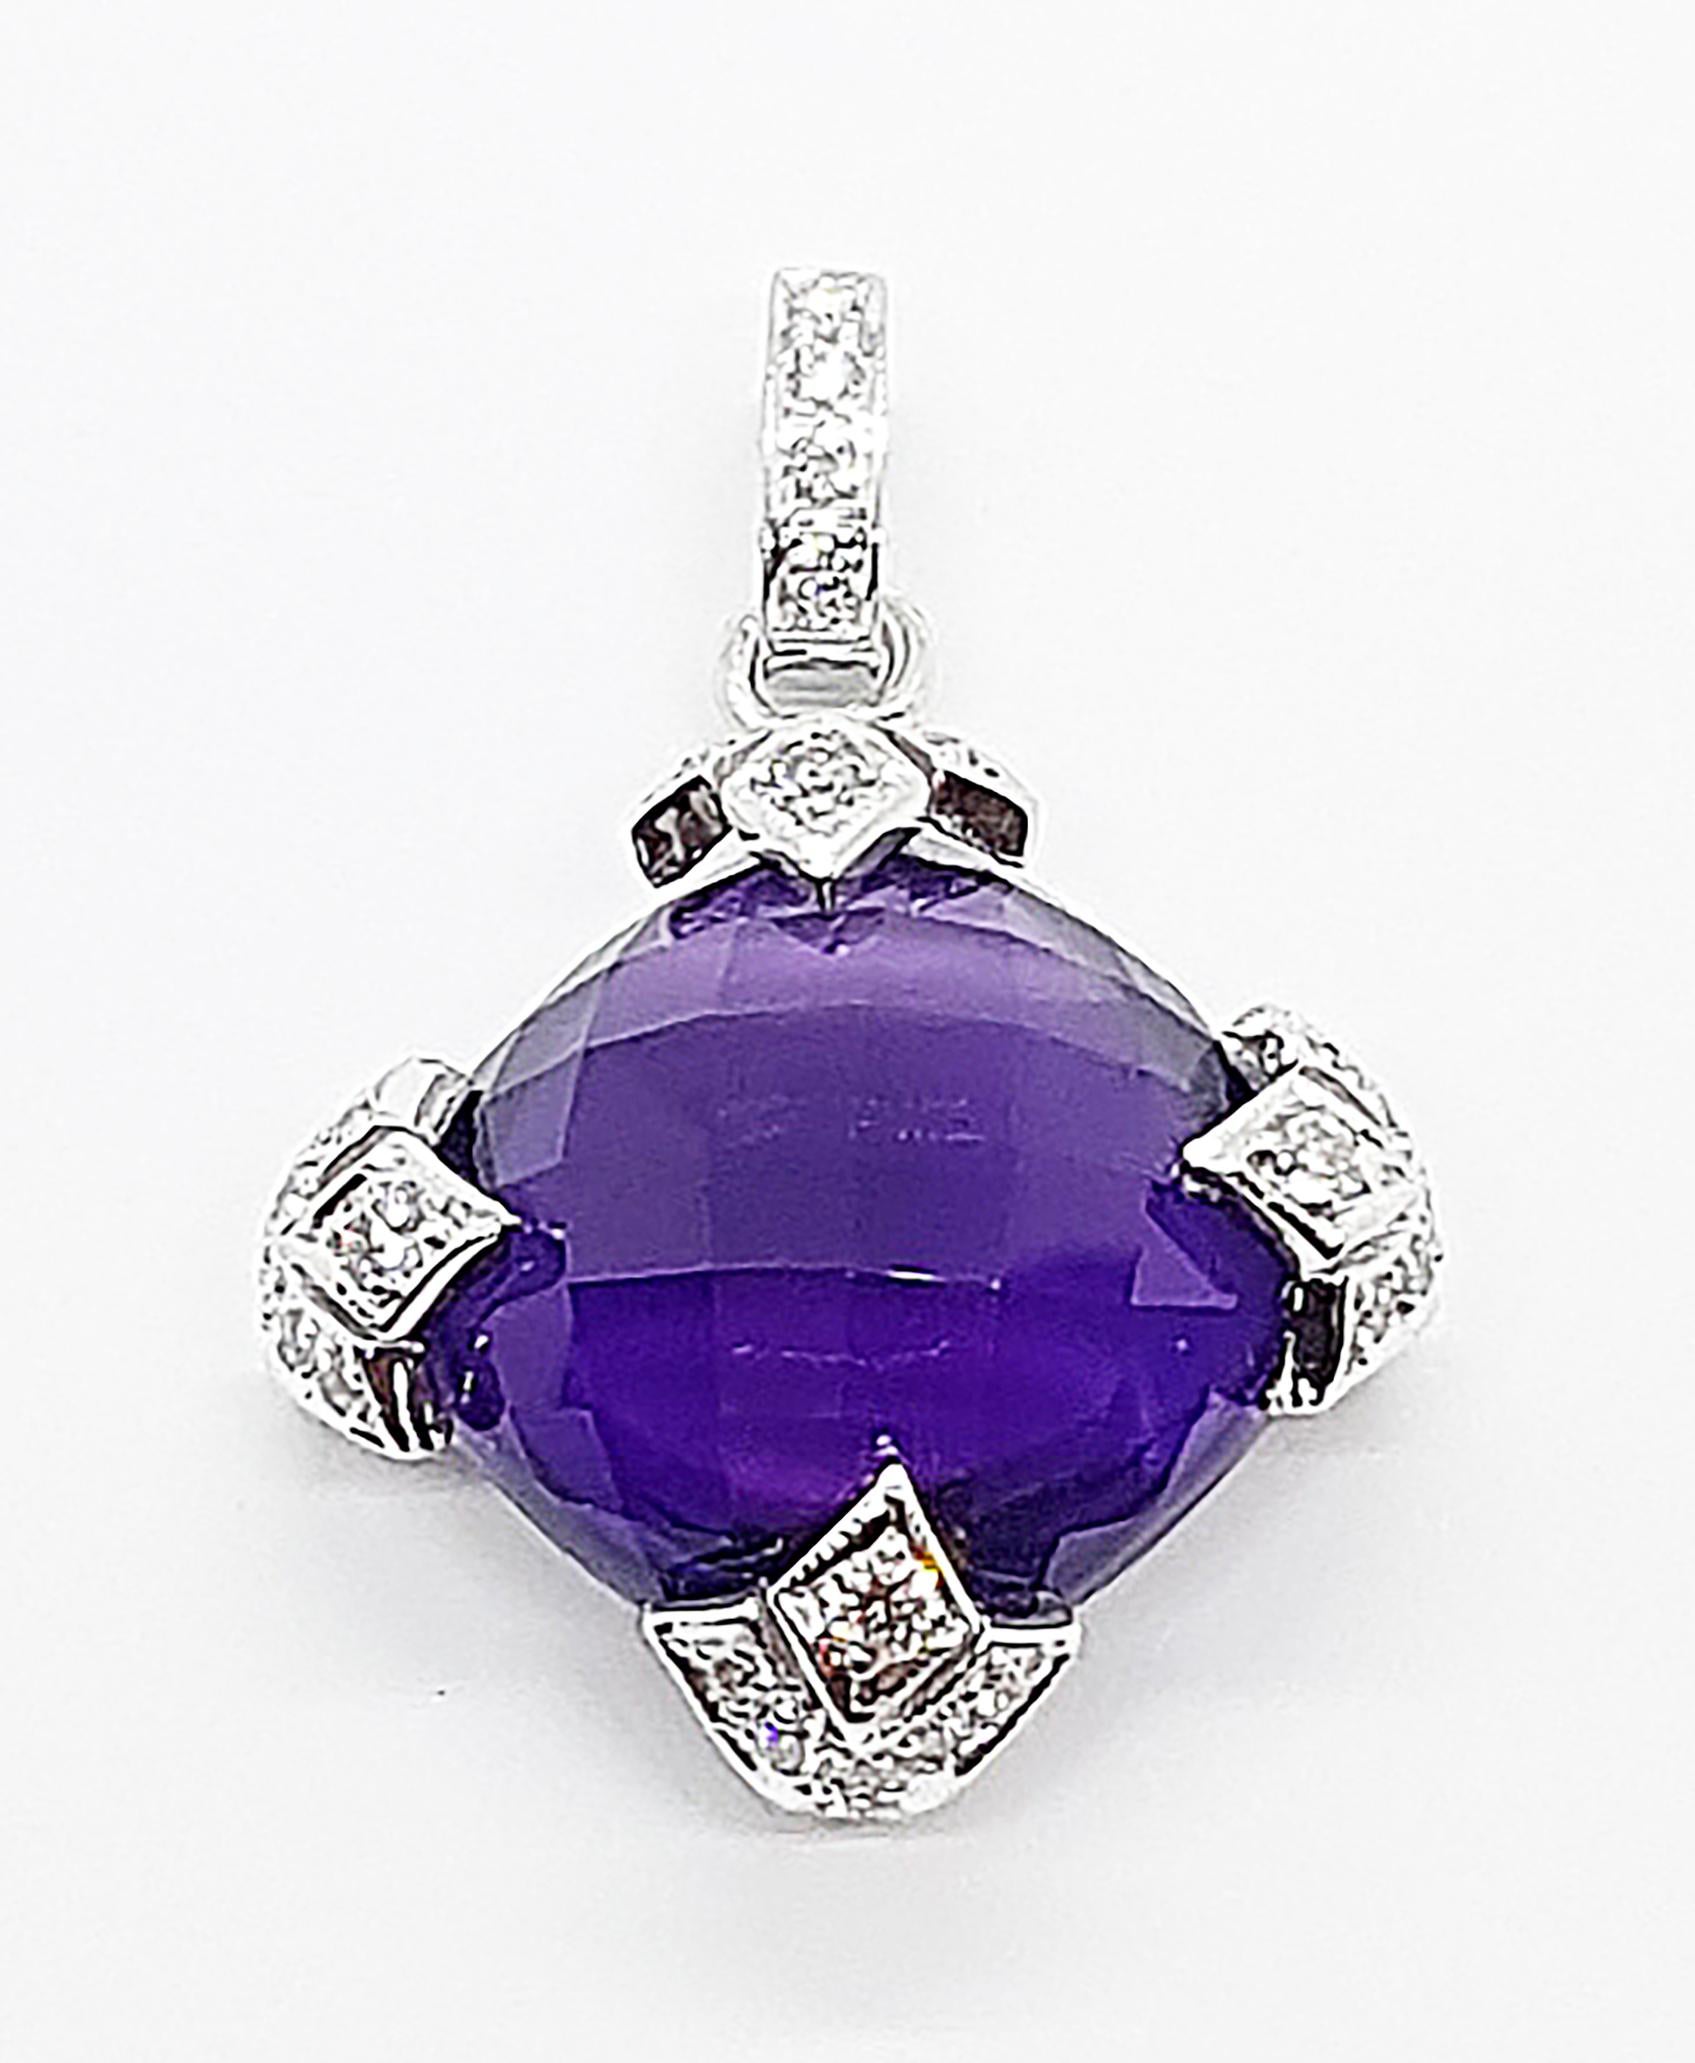 Amethyst 10.0 carats with Diamond 0.25 carat Pendant set in 18 Karat White Gold Settings
(chain not included)

Width:  2.3 cm 
Length: 3.3 cm
Total Weight: 7.92 grams

